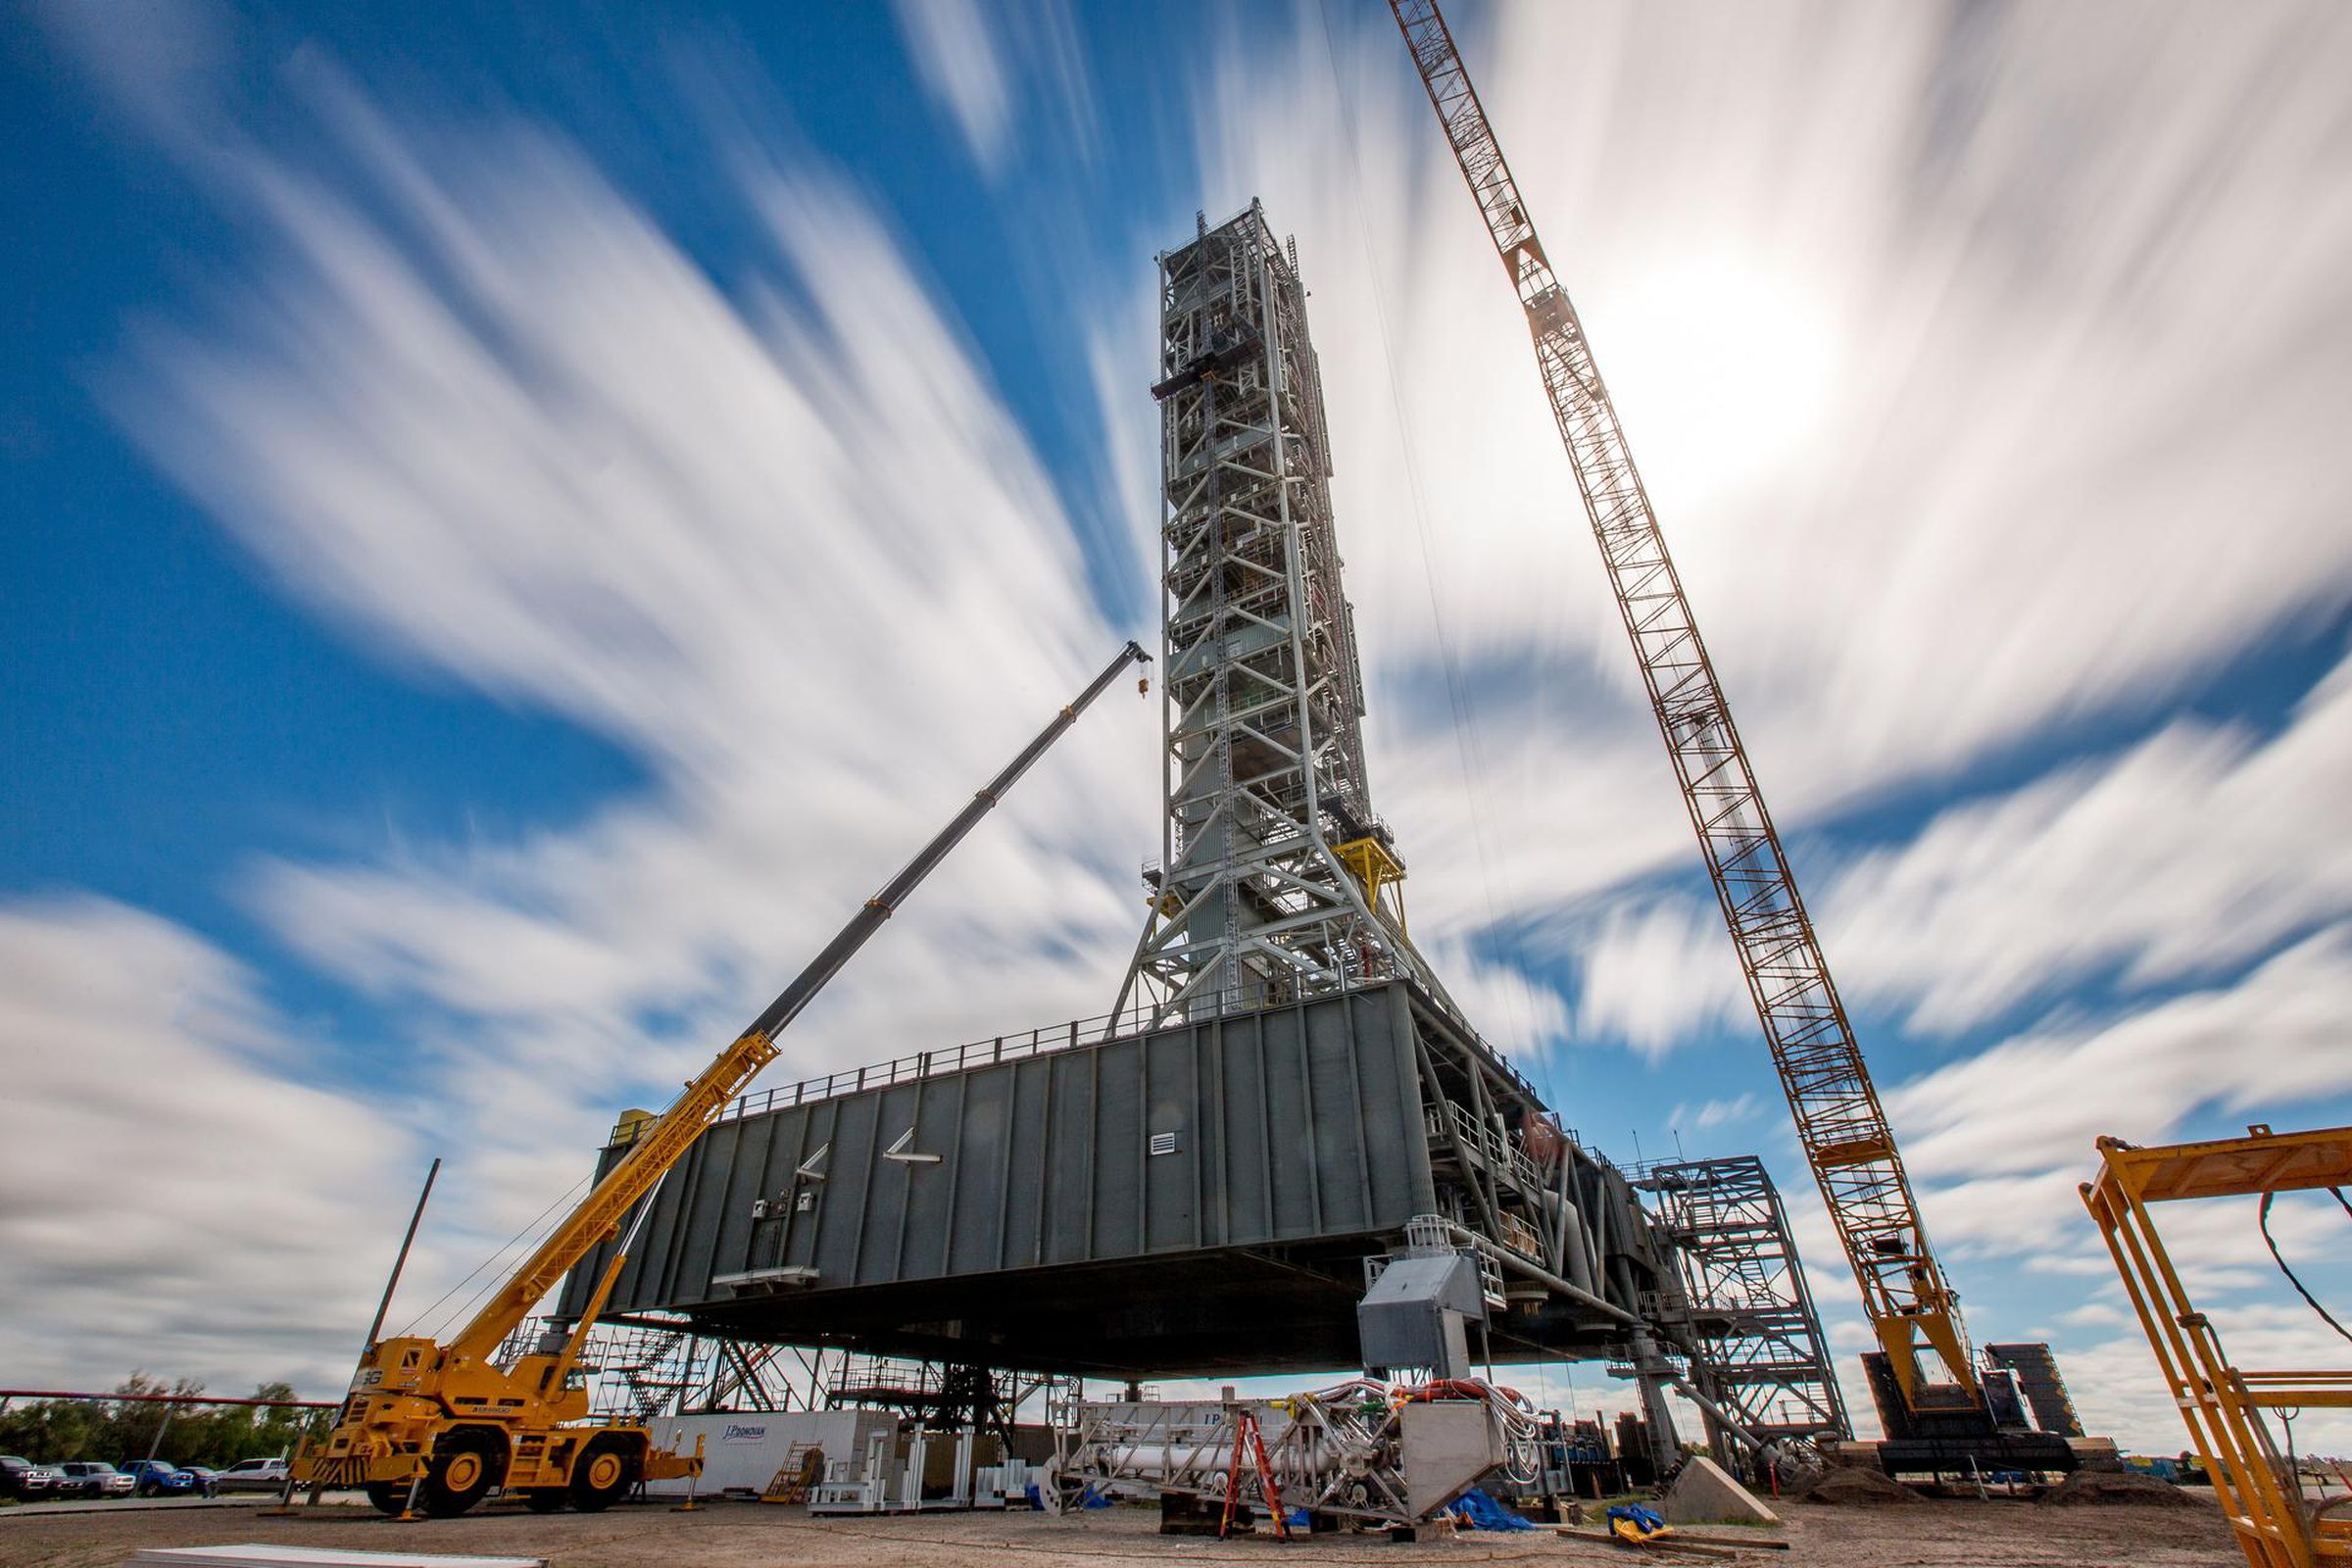 The current mobile launch platform at Kennedy Space Center